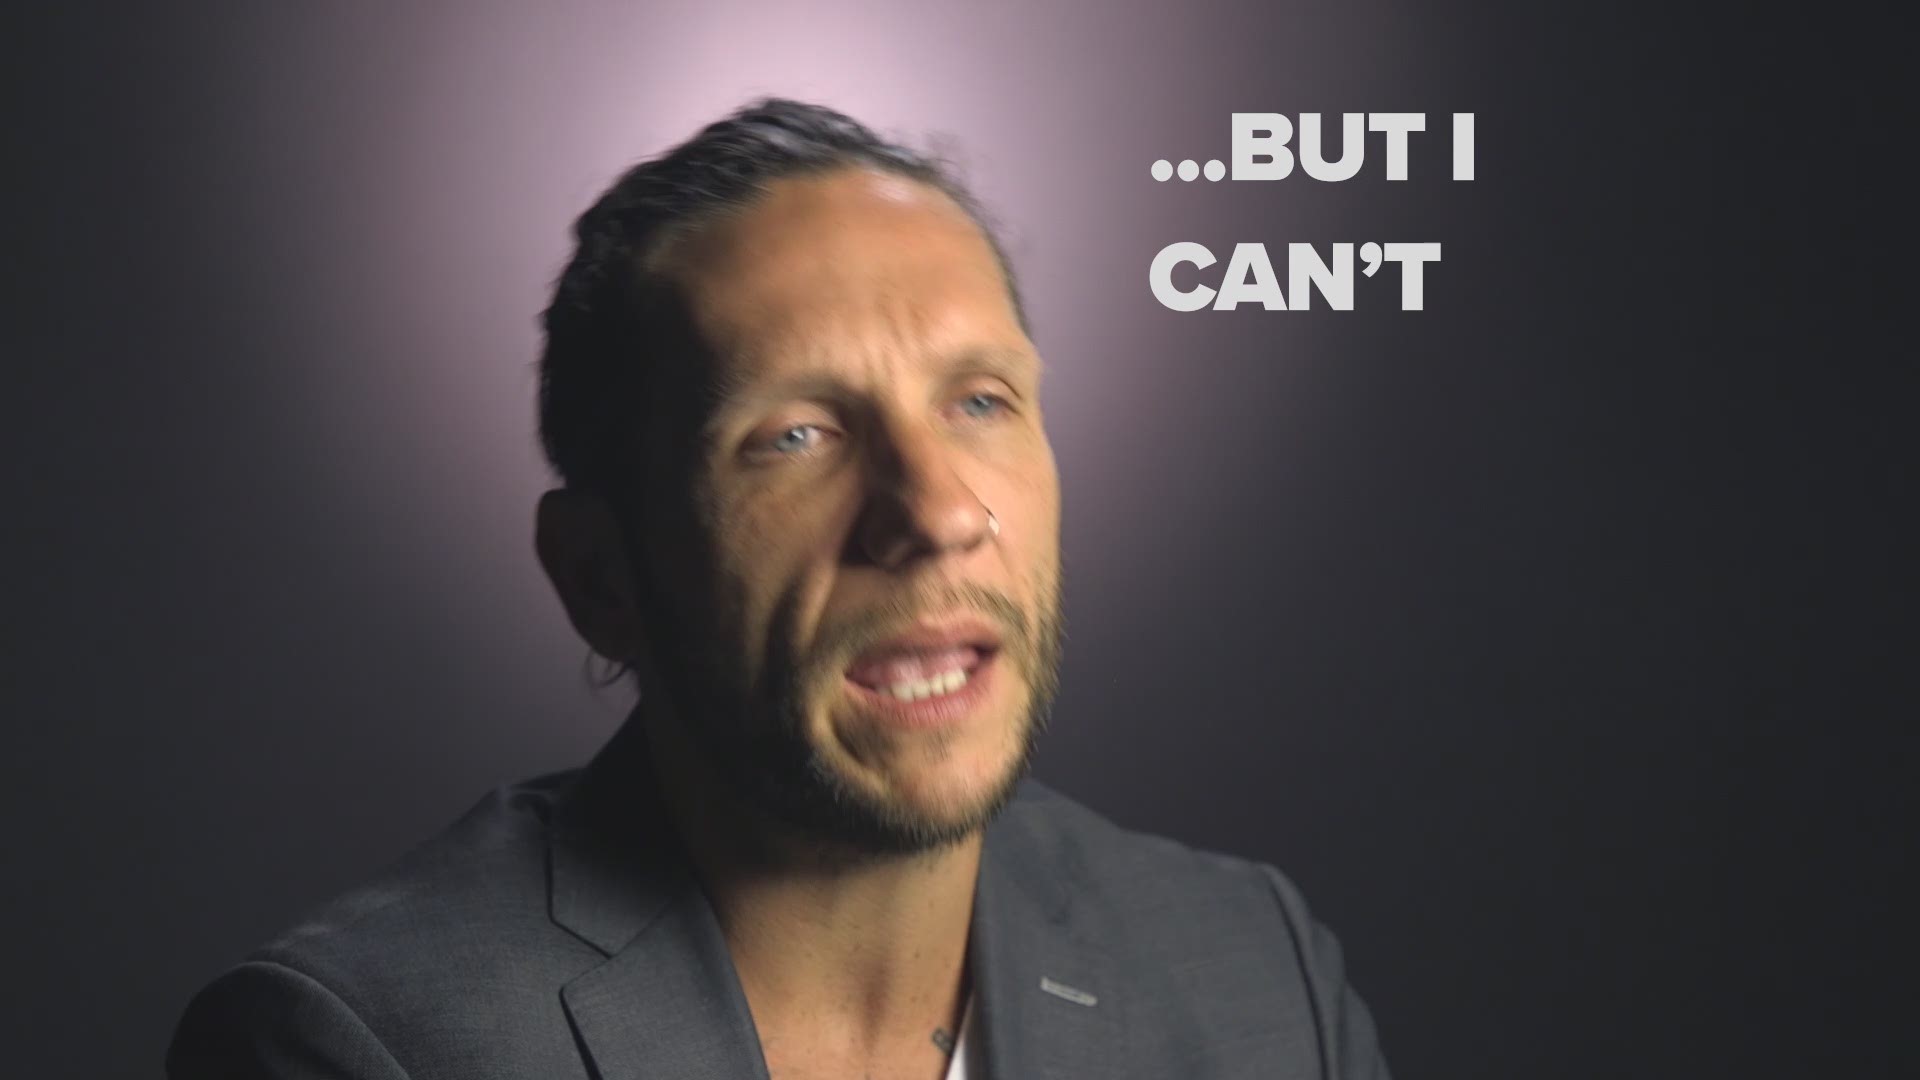 Addiction cost Brandon Novak a professional skateboarding career, and a TV job that netted him millions. He lost friends and family, but never his mother's love. Years later, Brandon is sober and helping others like him turn their lives around.